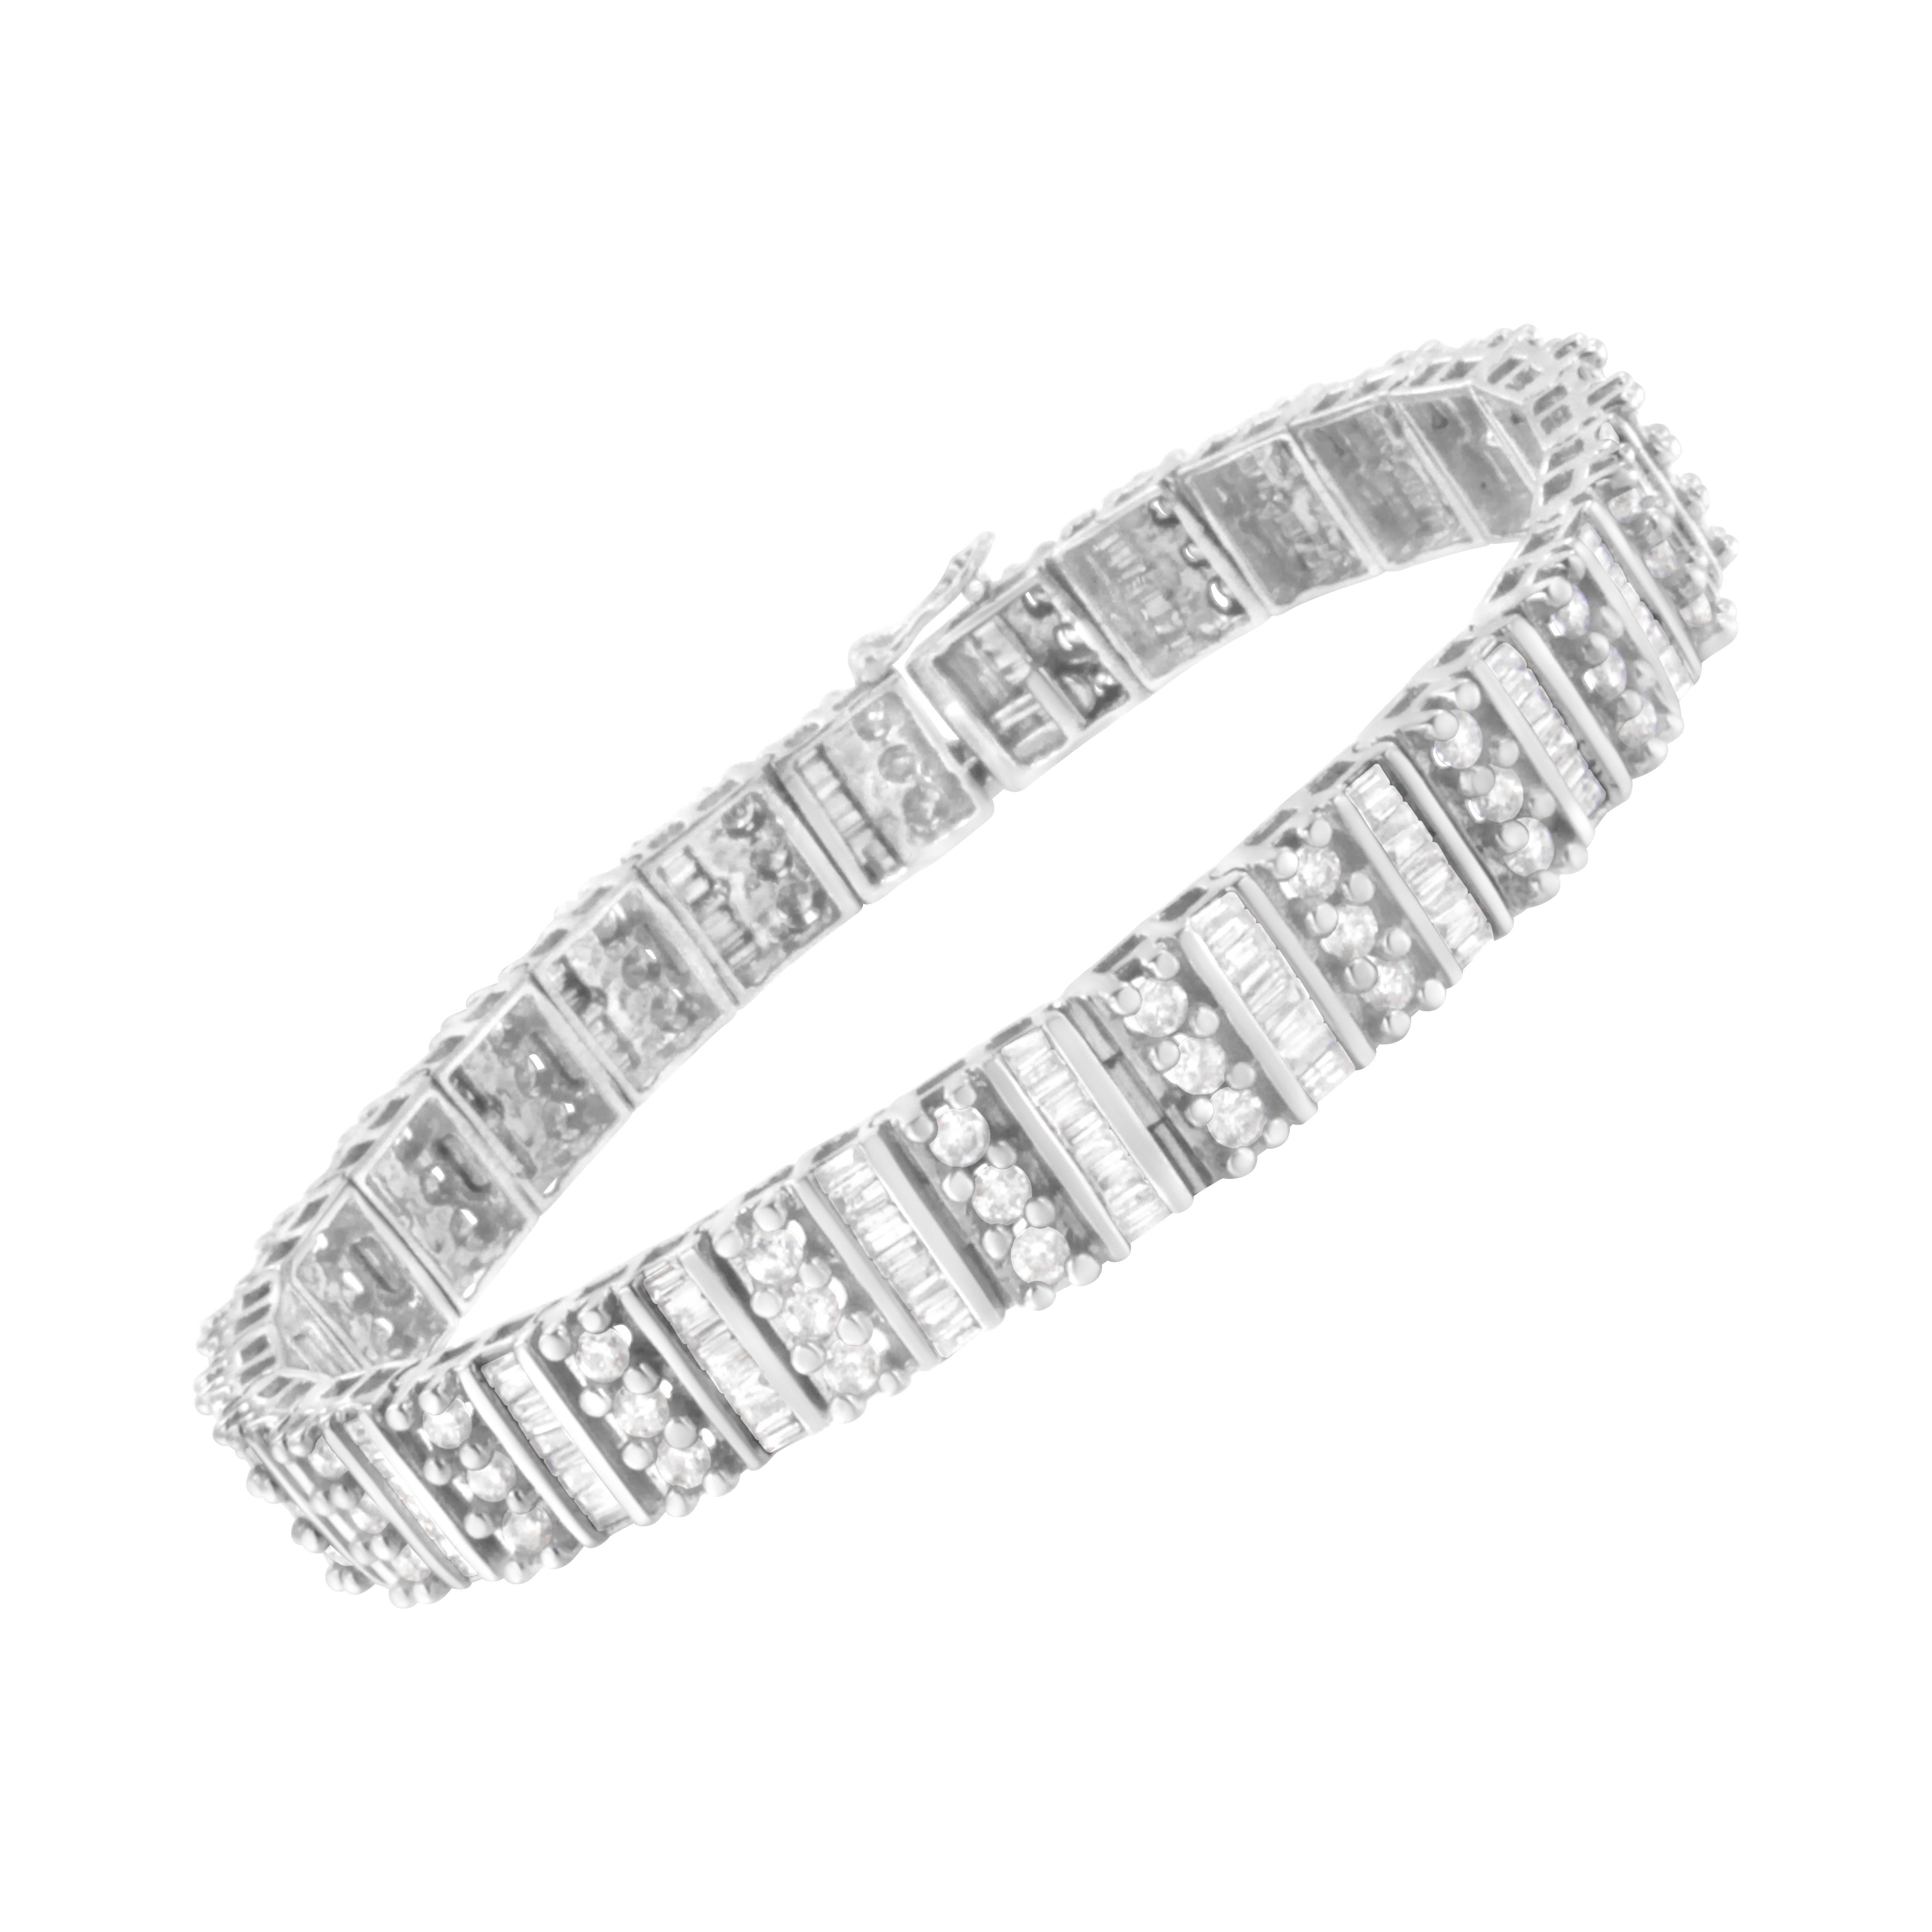 Embellish your wrist with this striking 14k white gold bracelet. 4 7/8ct TDW of dazzling diamonds are displayed in this design. Each of the links in the bracelet features two vertical rows of diamonds. A prong set round cut diamond row sits besides